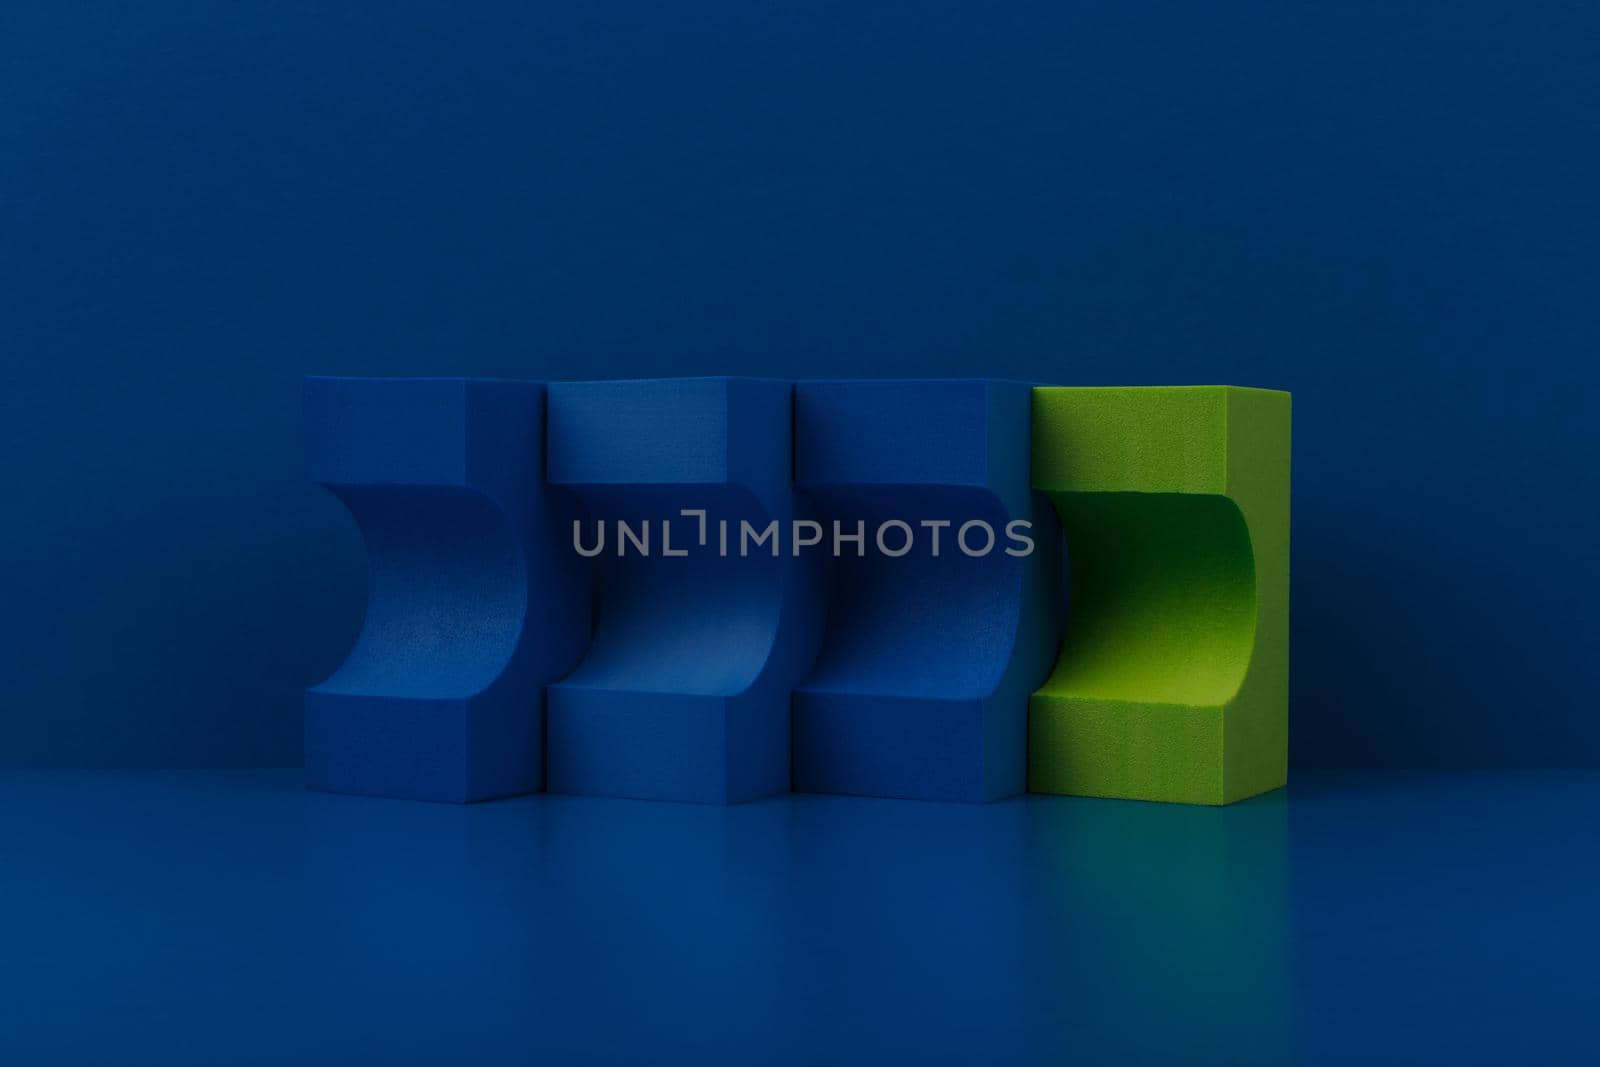 Abstract composition with blue and green figures on blue reflective table against blue background by Senorina_Irina